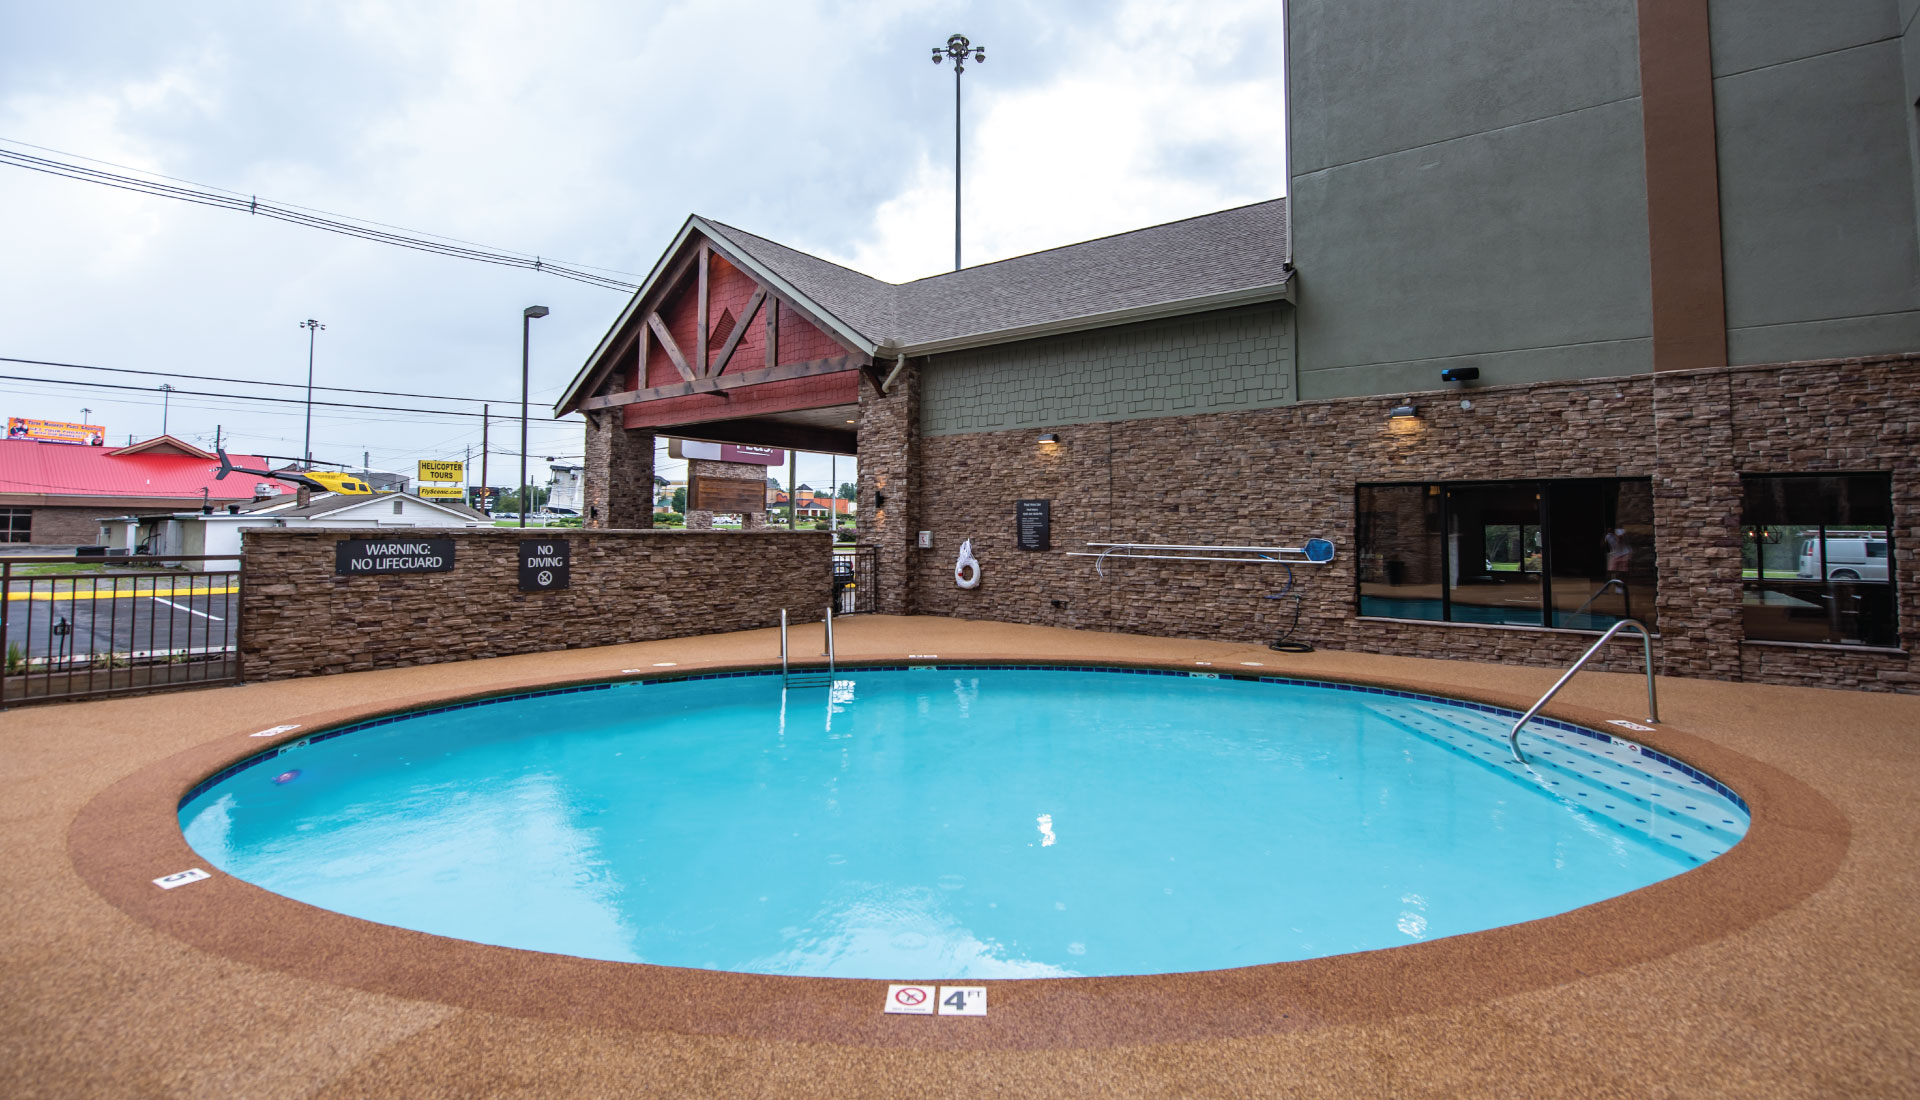 A view of outdoor season pool